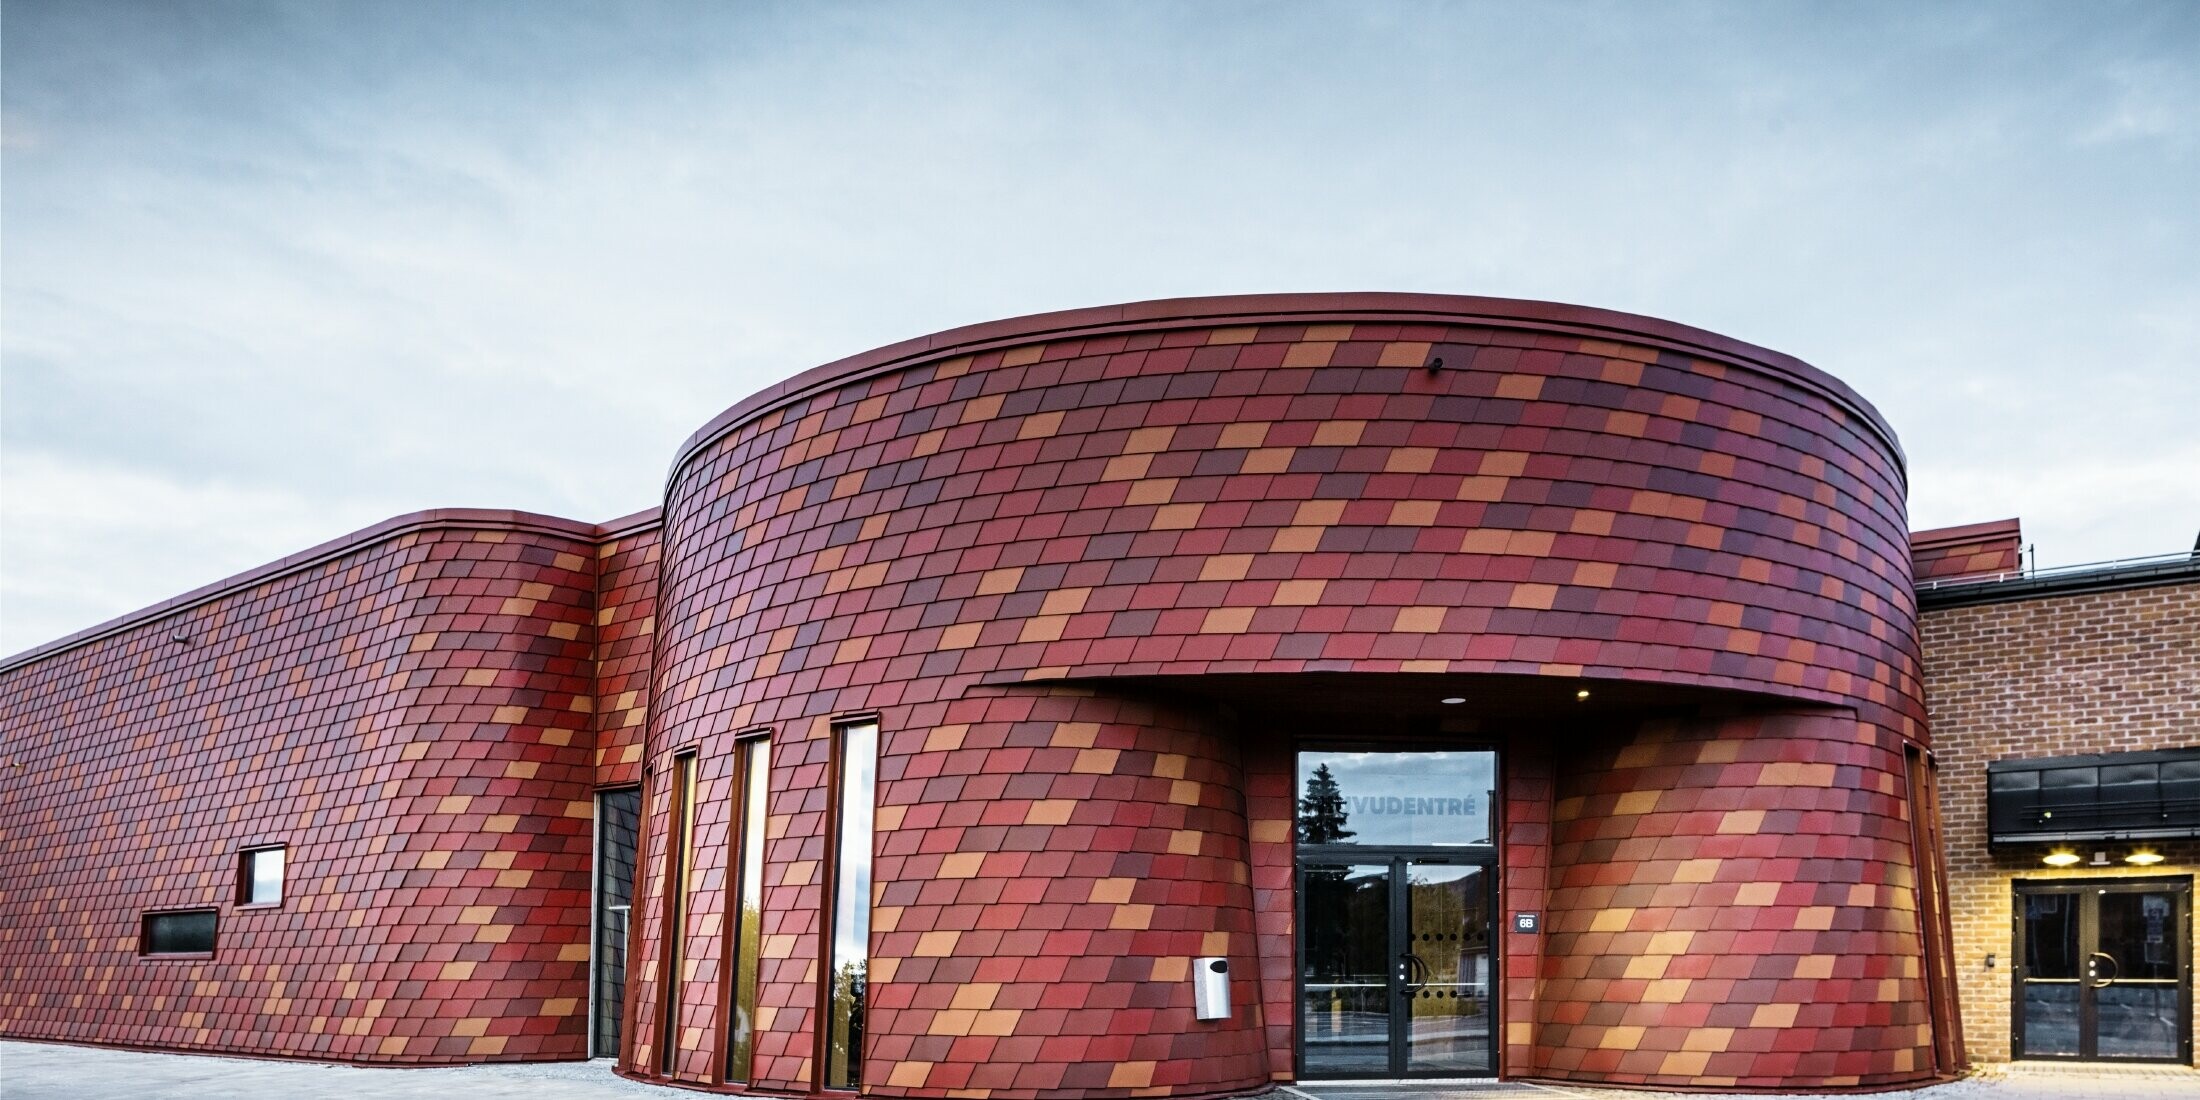 Ice rink with a flat roof and curved façade, the façade is clad with wall shingles made of aluminum from PREFA in different shades of red - oxide red, brick red, red-brown, brown-red